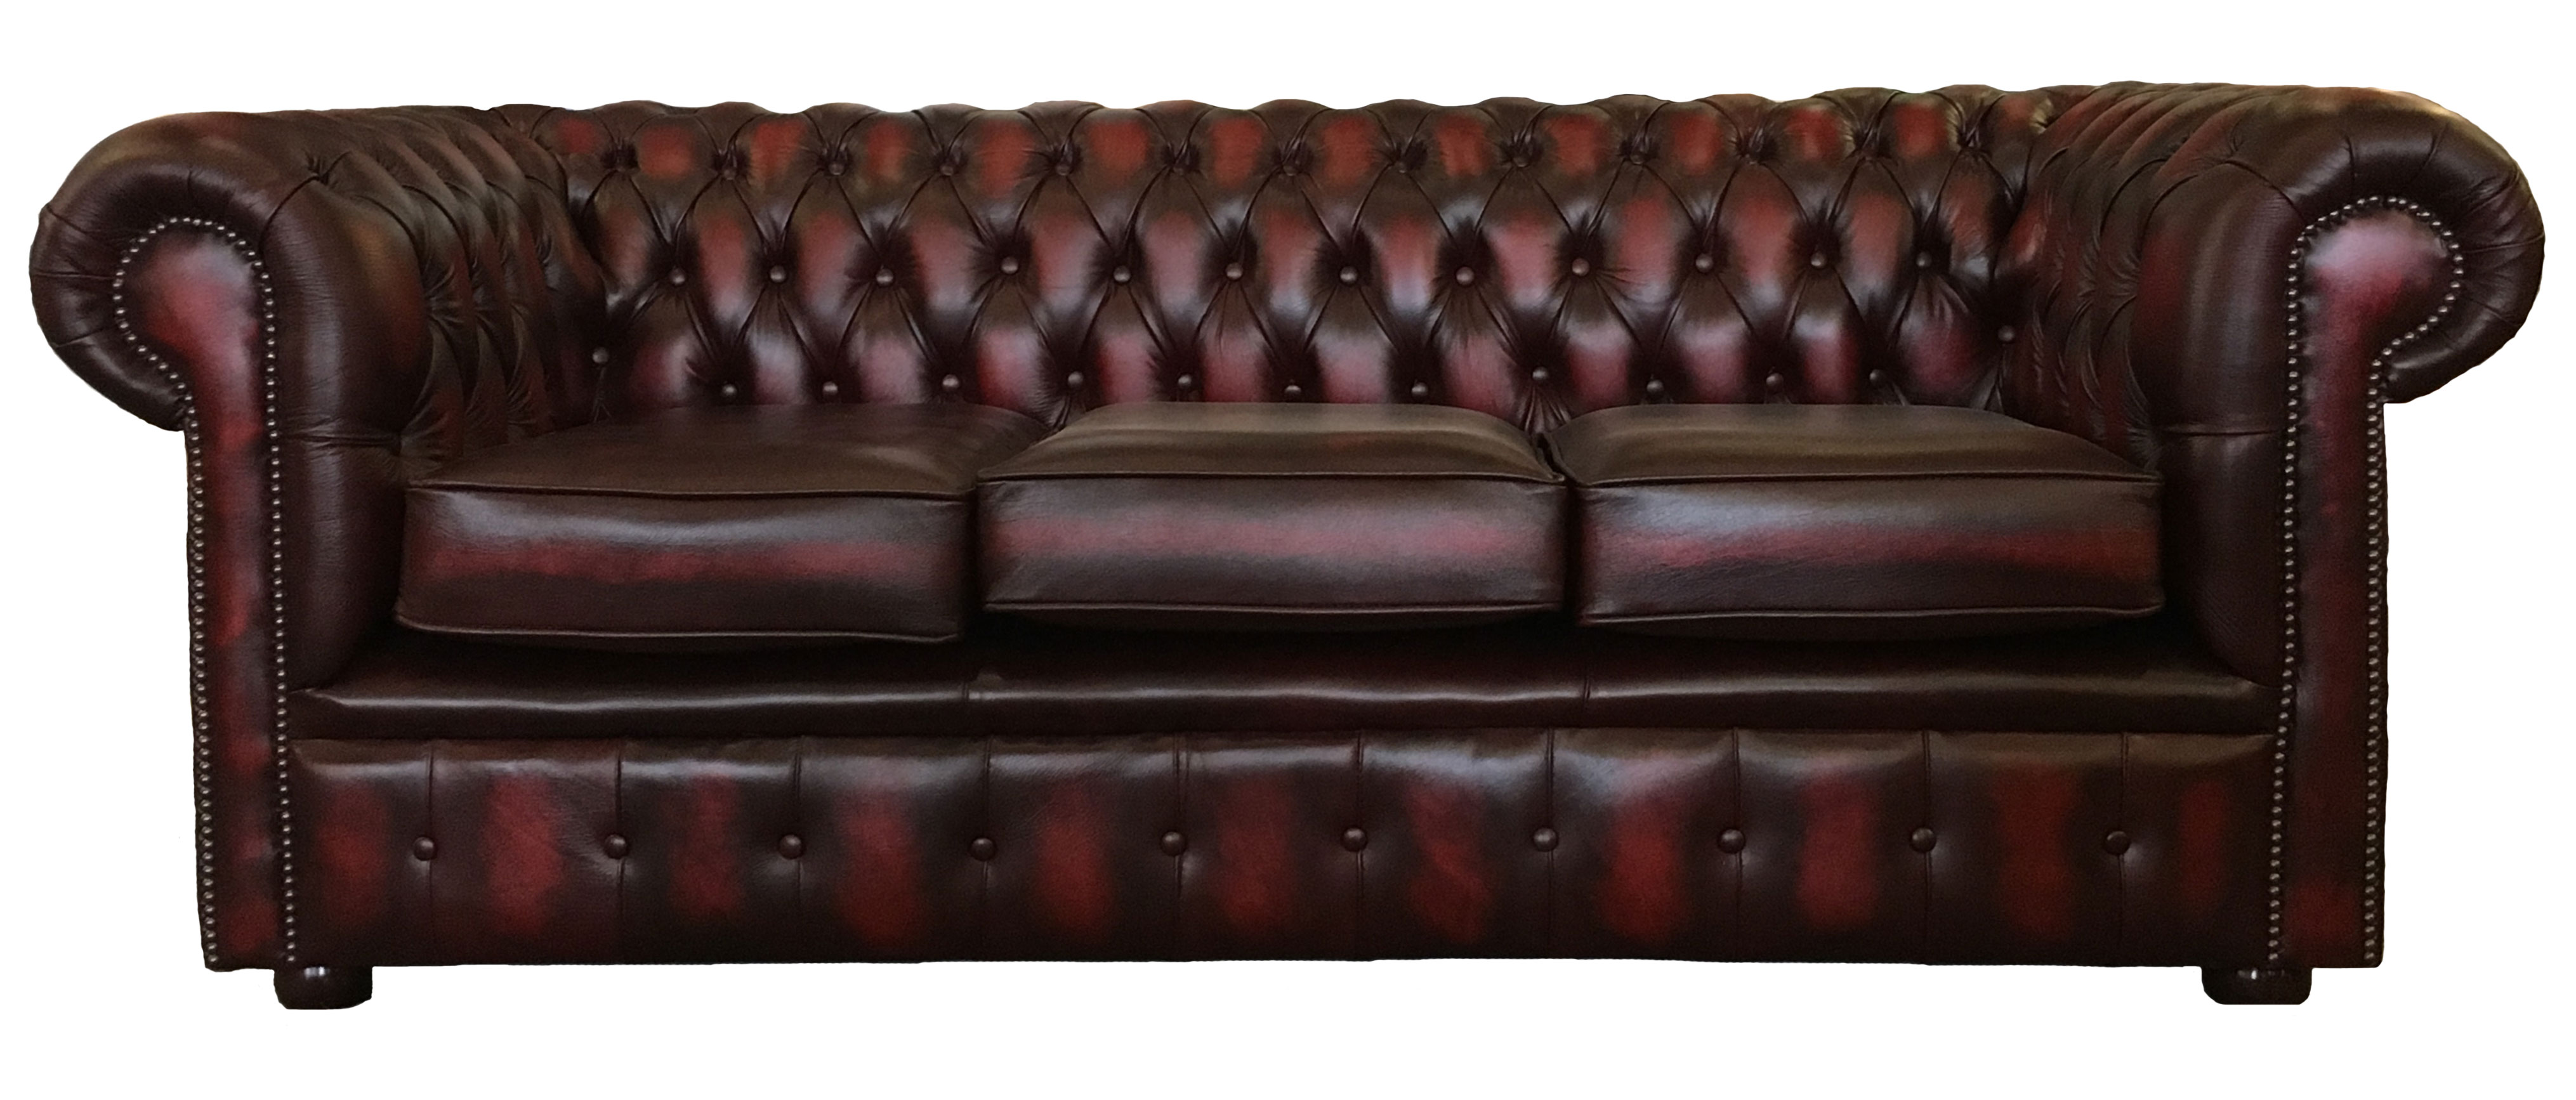 used red leather chesterfield sofa